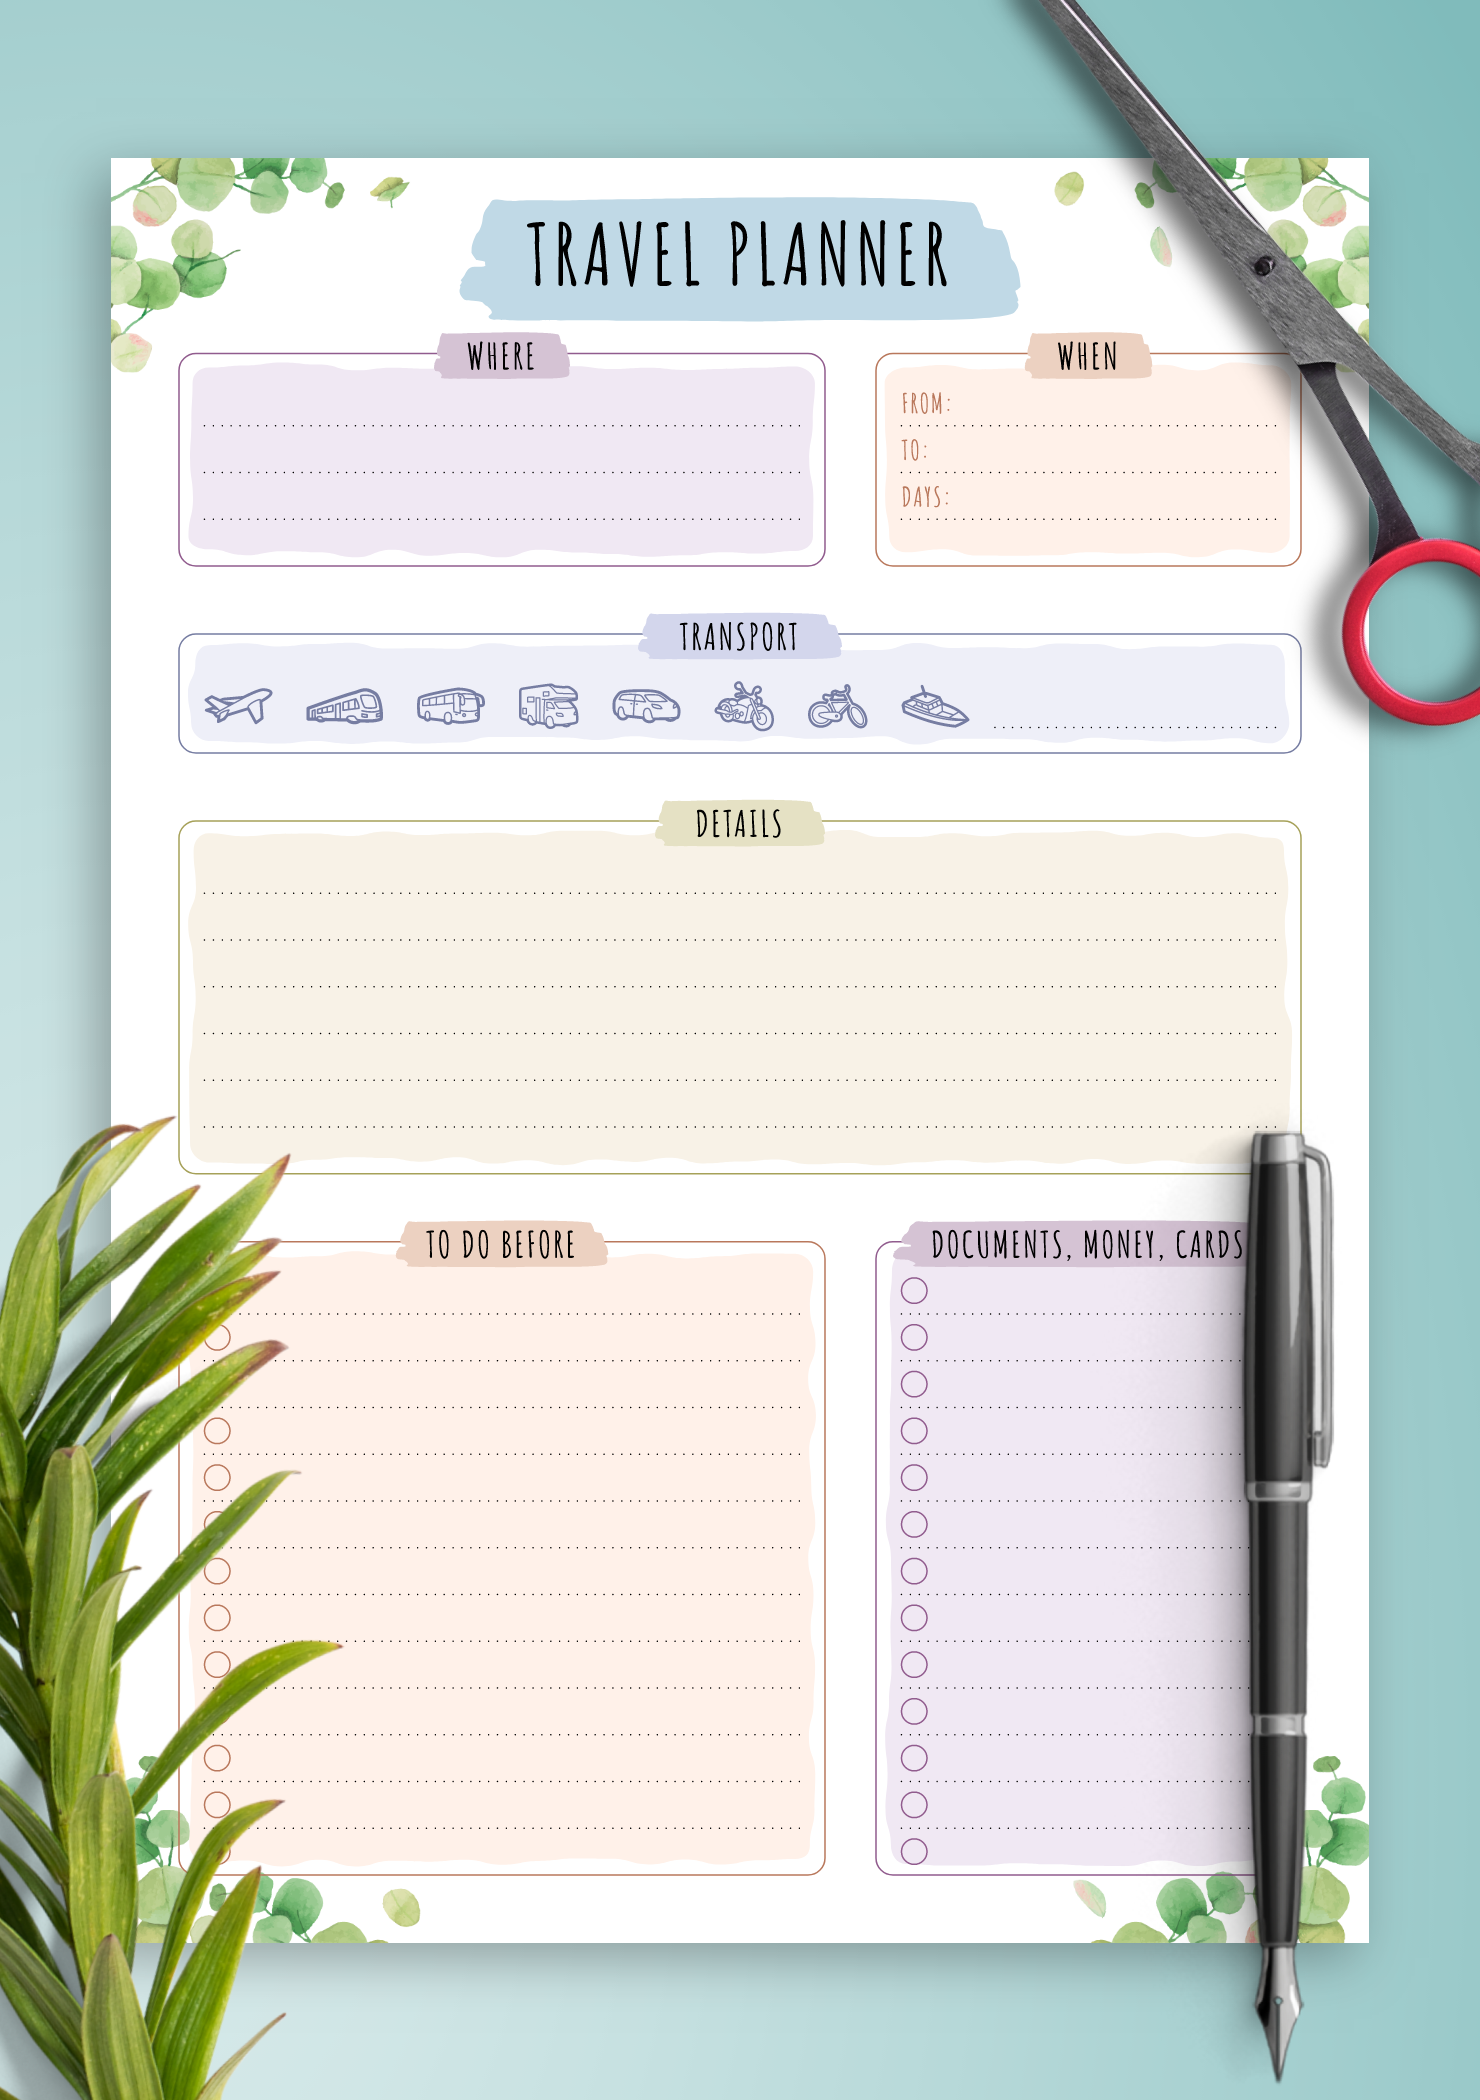 Download Printable Travel Planner Template - Floral Style PDF